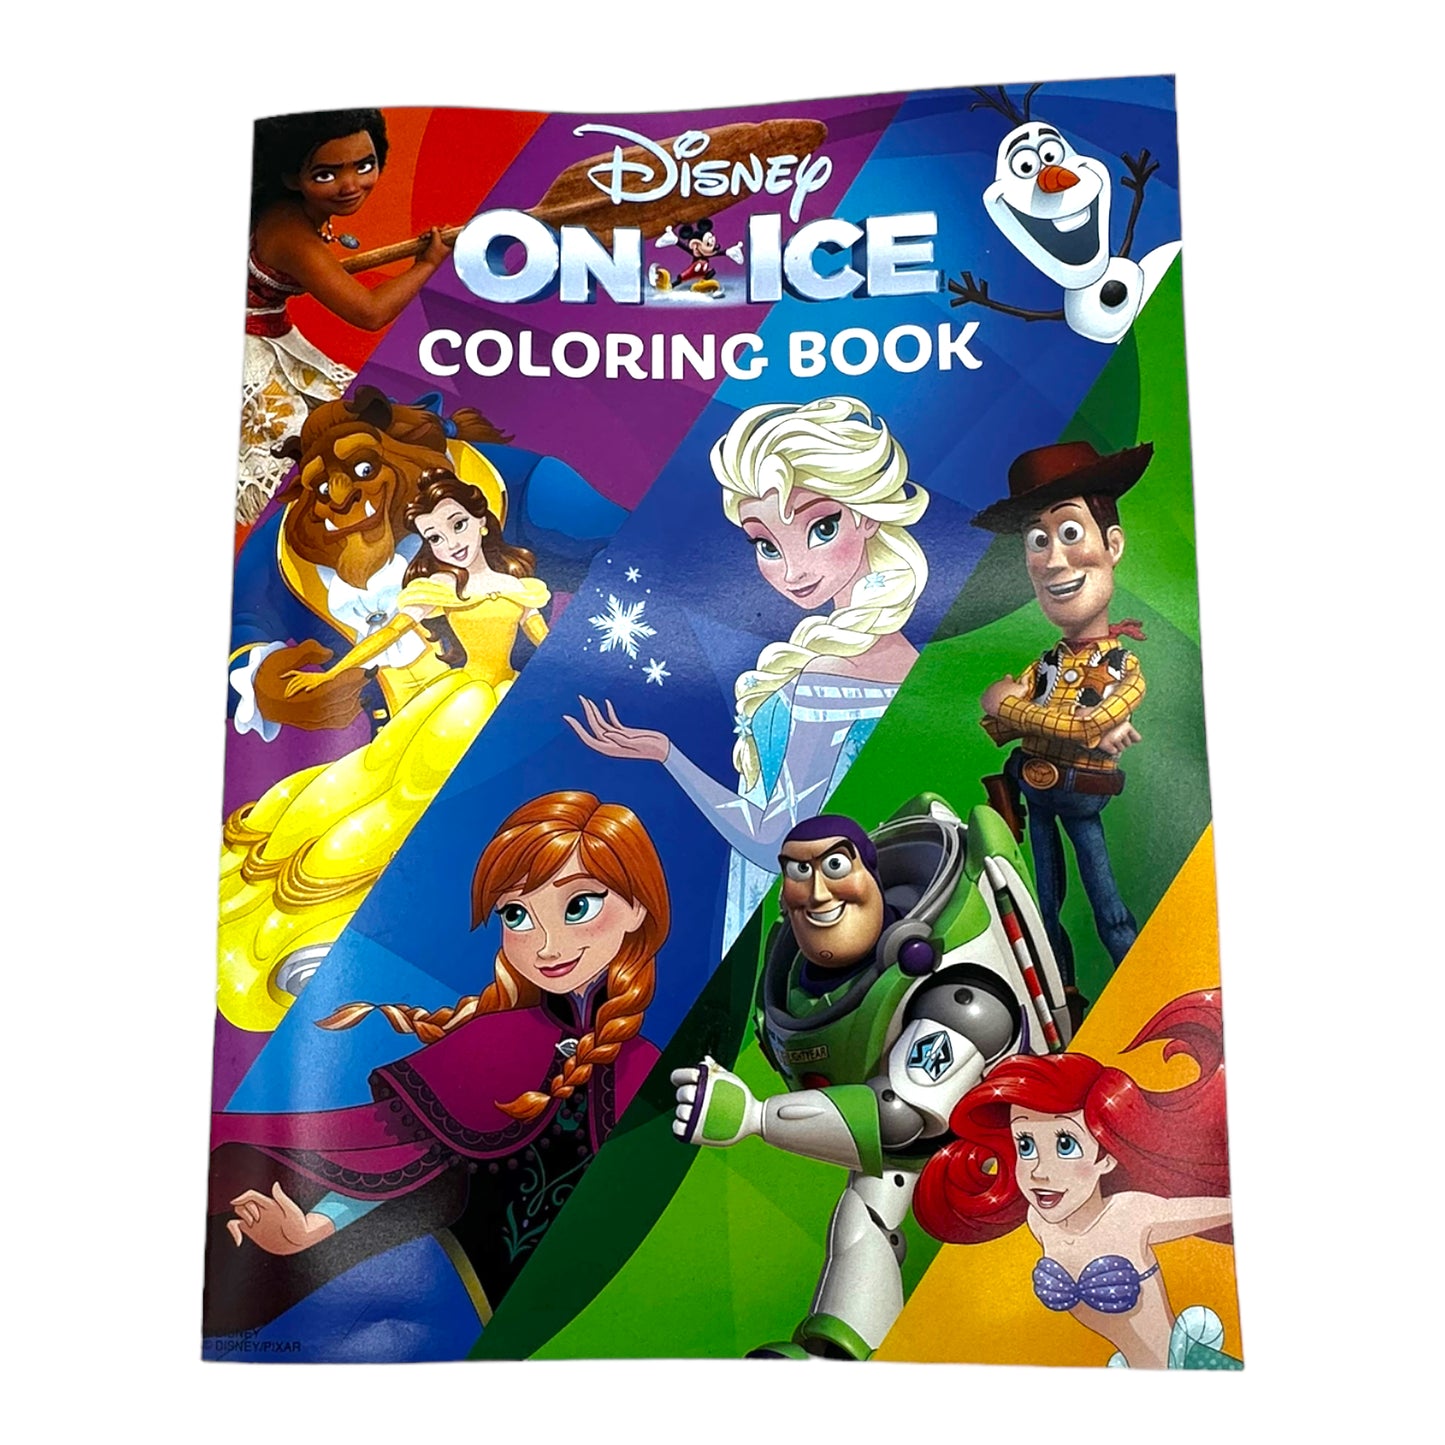 Disney On Ice Coloring Book